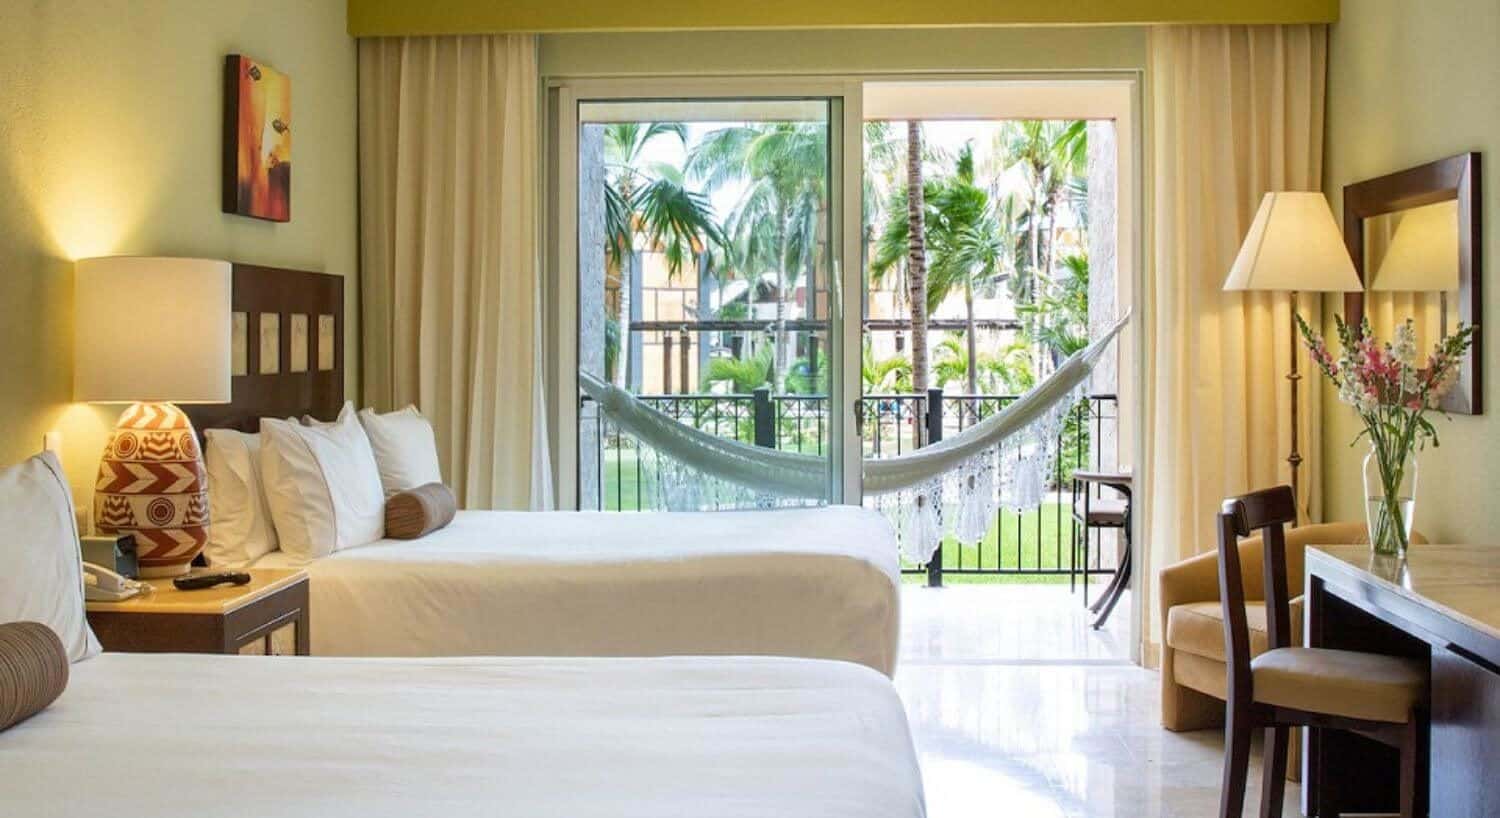 A bedroom with two queen beds with white bedding, a nightstand with lamp in between them, a writing desk and chair, a plush armchair in the corner, and sliding doors opening out to a private terrace with patio furniture and hammock, overlooking the resort grounds with green grass and palm trees.